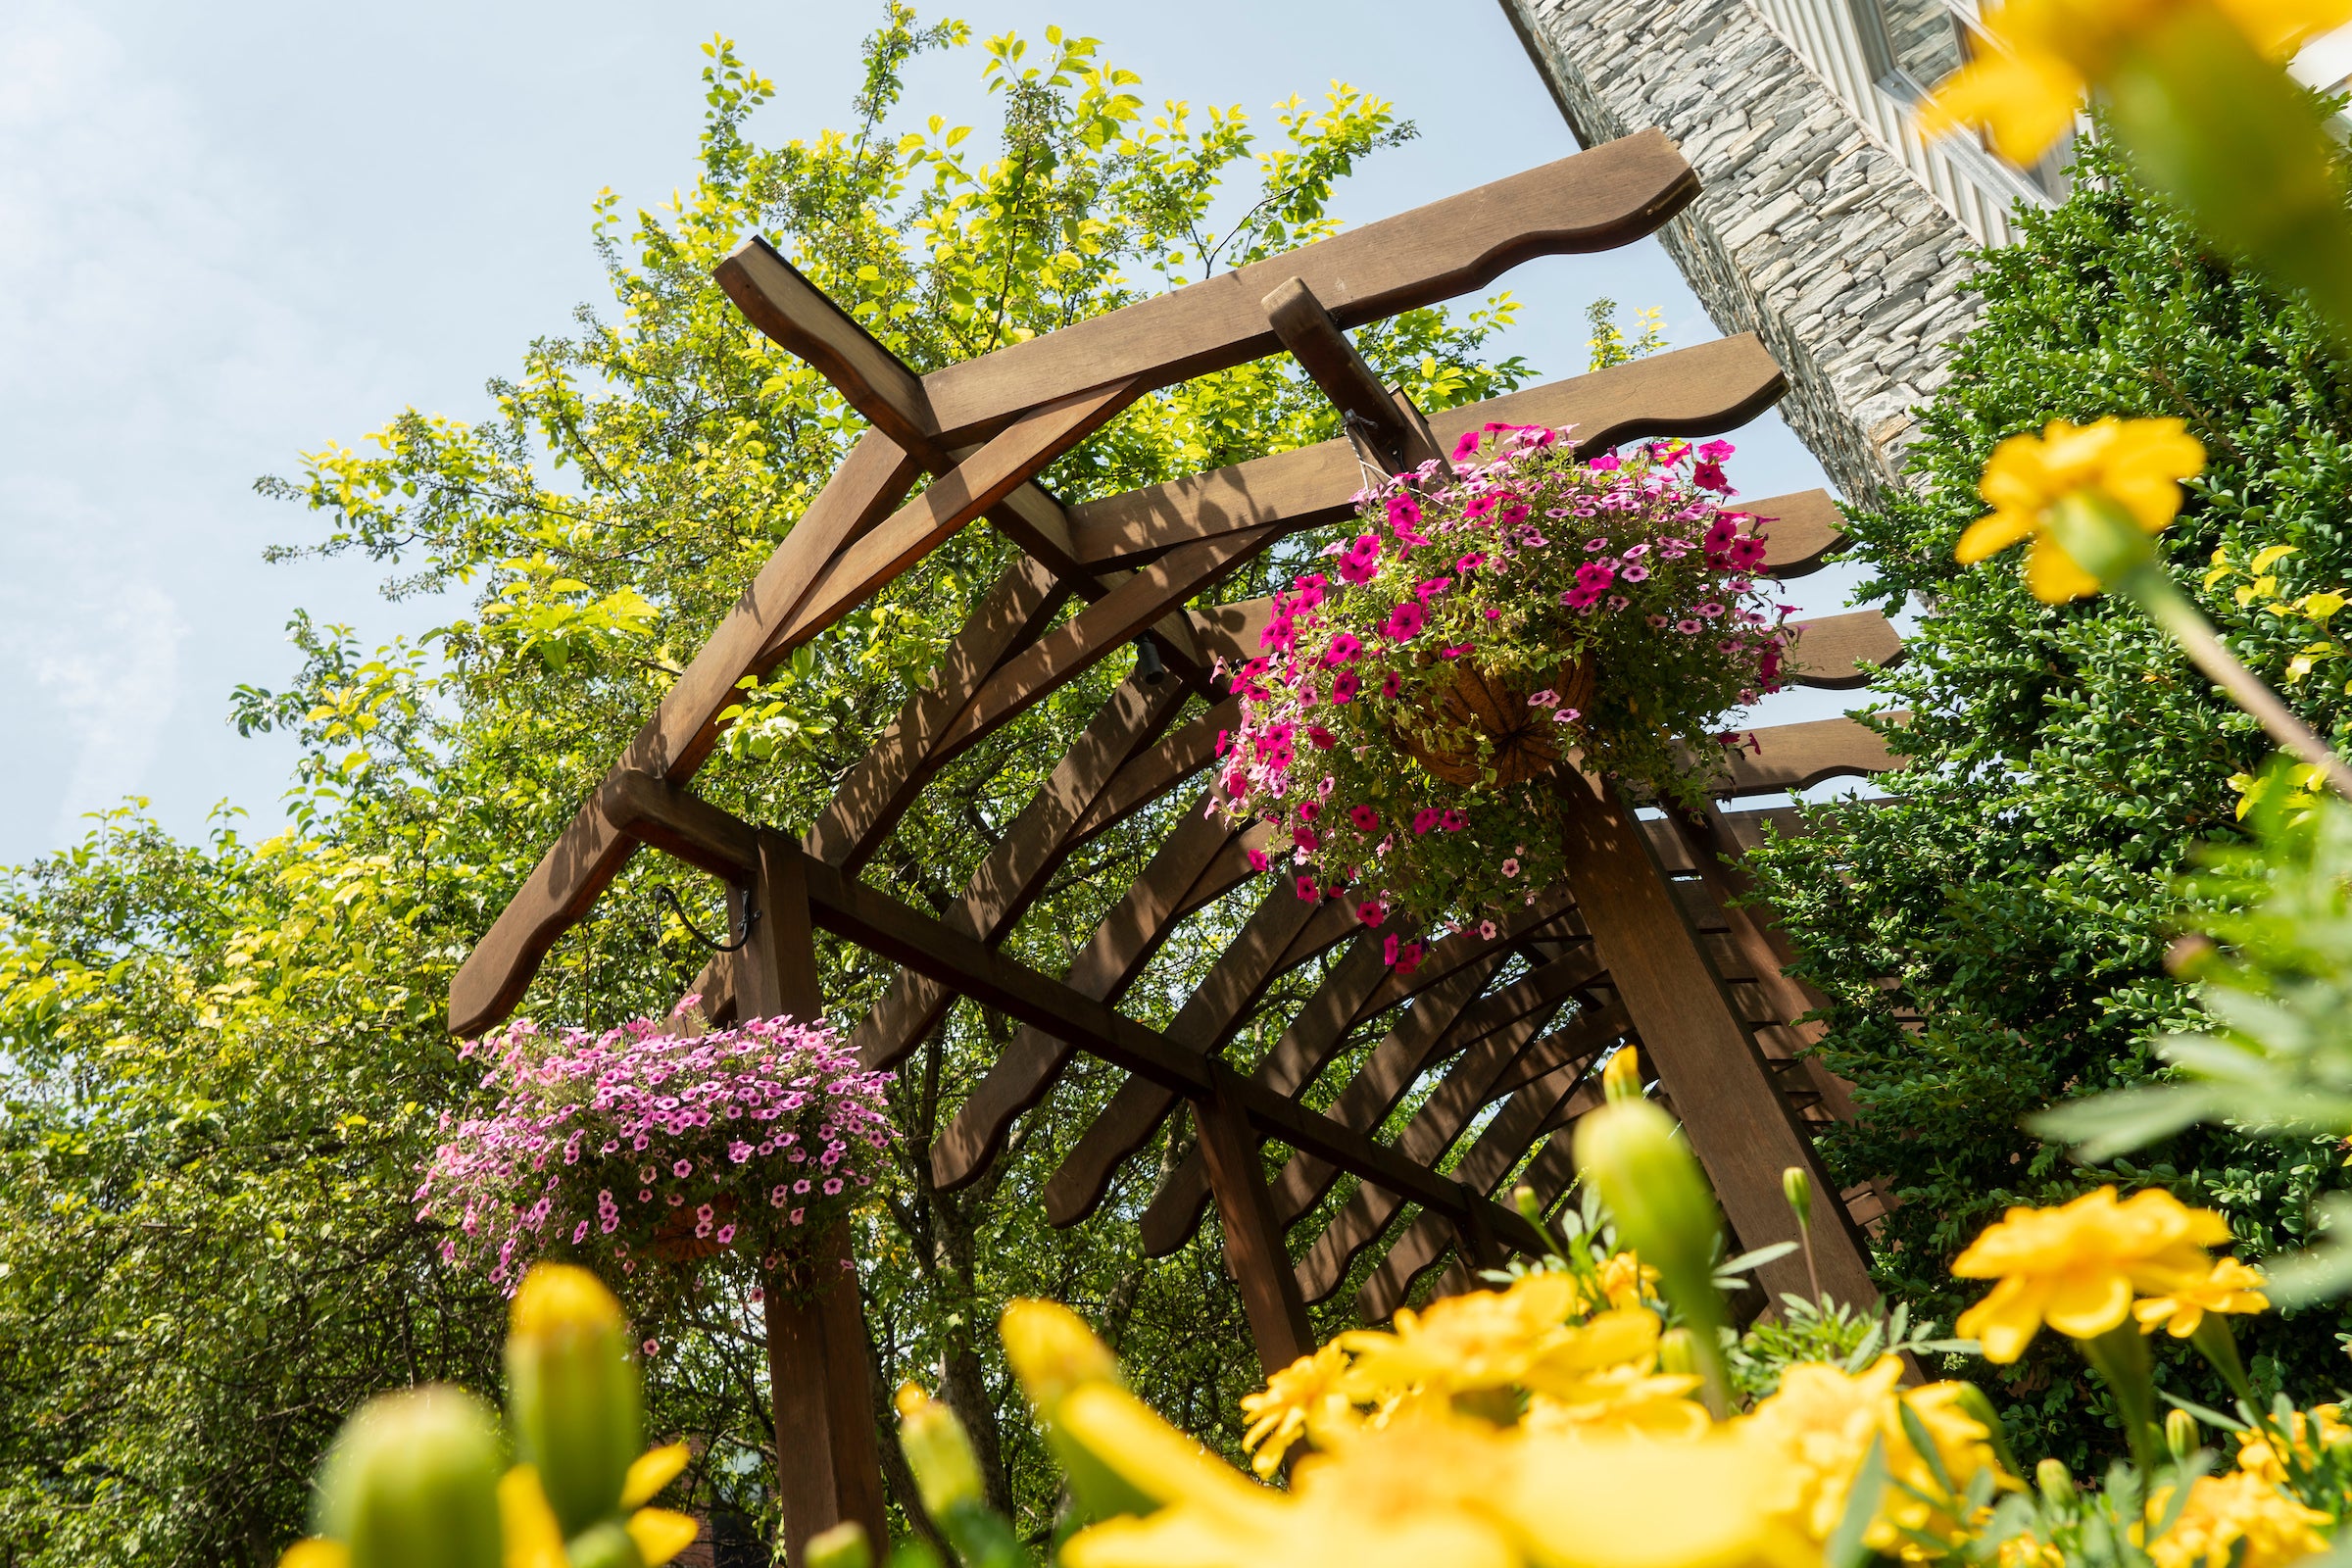 Pergola and flowers in summer on LVC campus